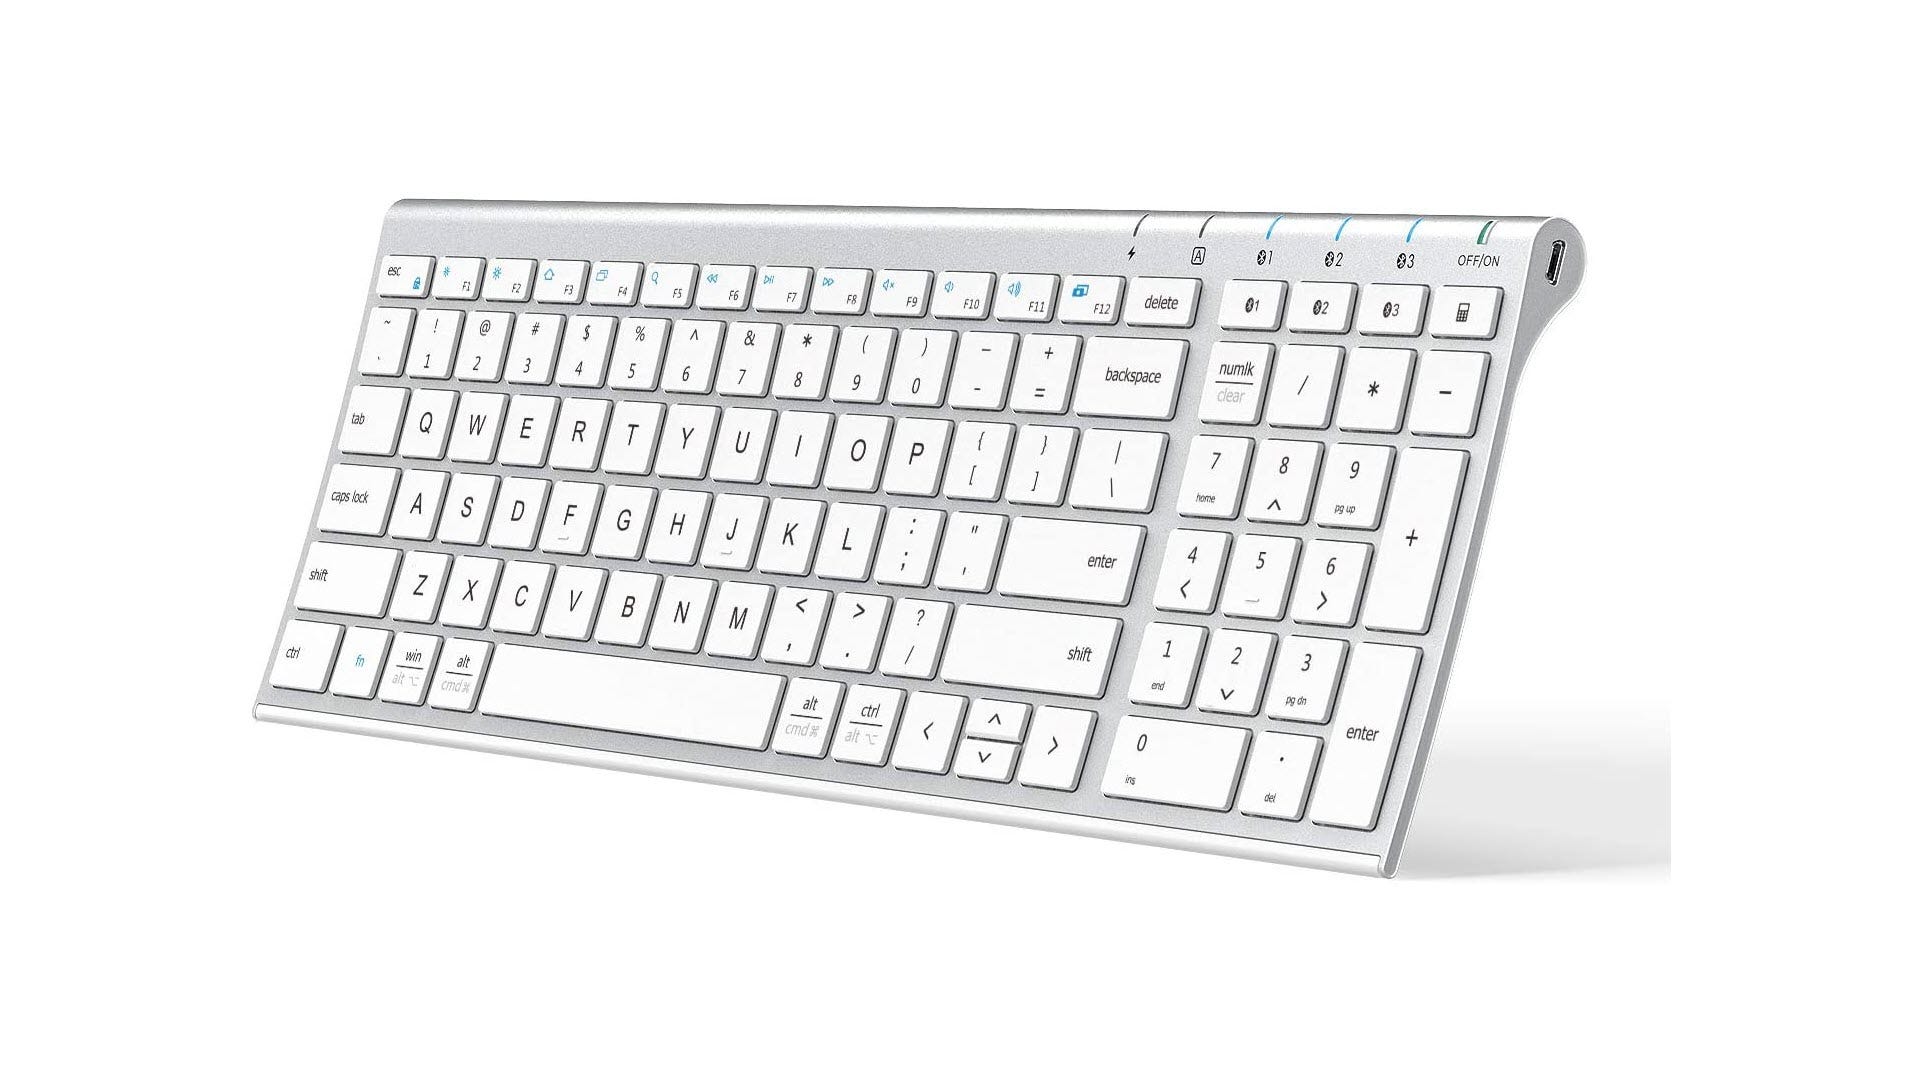 An iClever keyboard that looks very similar to an Apple keyboard